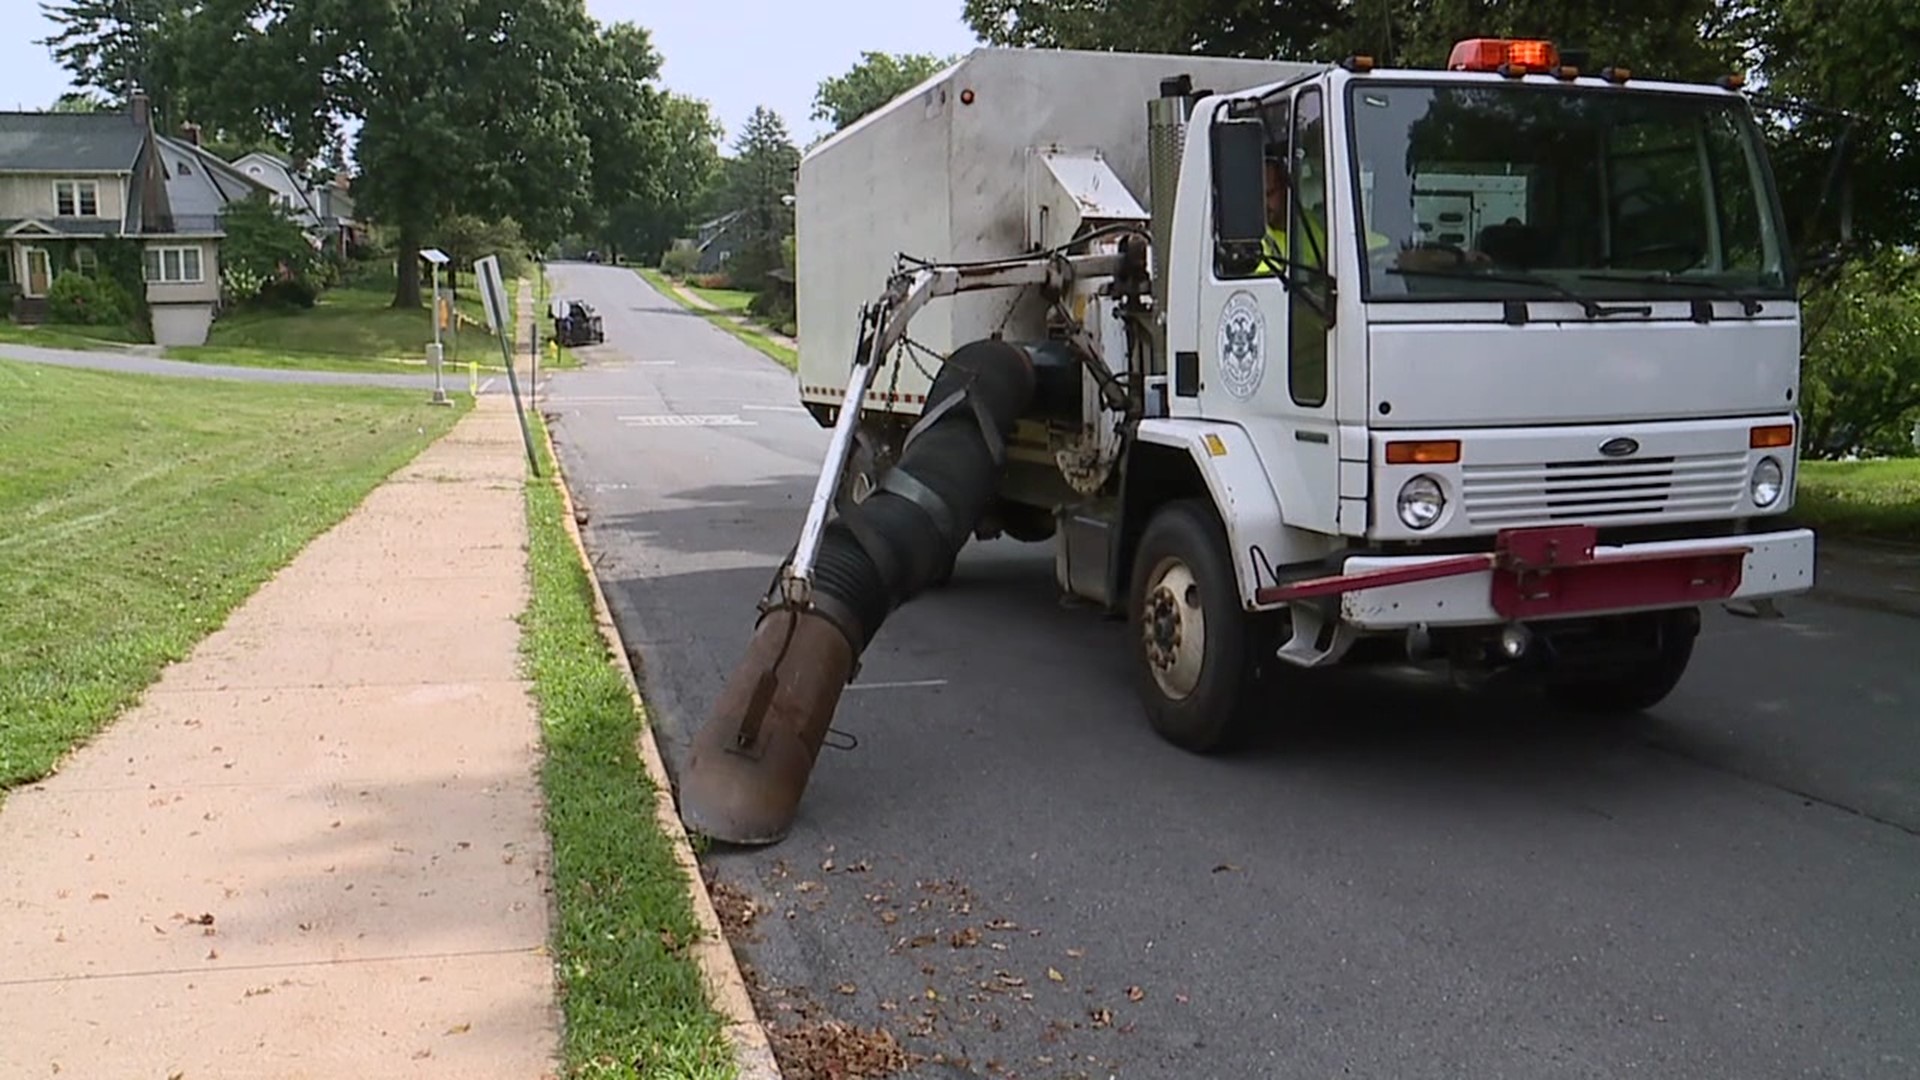 City employees in Williamsport are preparing the potential for floods caused by Hurricane Ida.